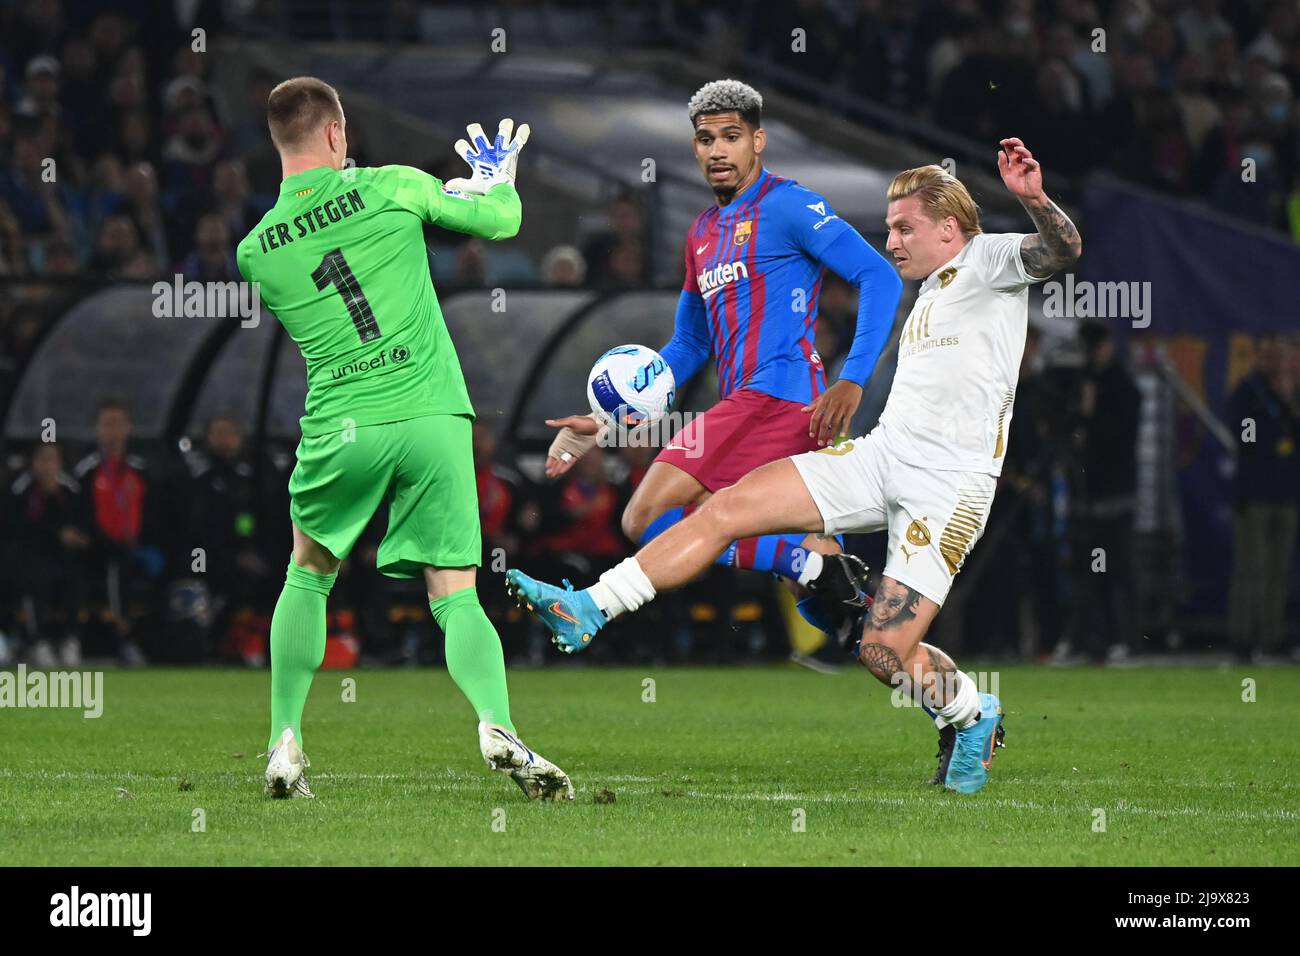 Sydney Olympic Park, Australia. 25th May, 2022. Marc-André ter Stegen (L) of FC Barcelona team and Jason Steven Cummings (R) of A-Leagues All Stars team in action during the match between FC Barcelona and the A-League All Stars at Accor Stadium. (Final score; FC Barcelona 3:2 A-Leagues All Stars). Credit: SOPA Images Limited/Alamy Live News Stock Photo